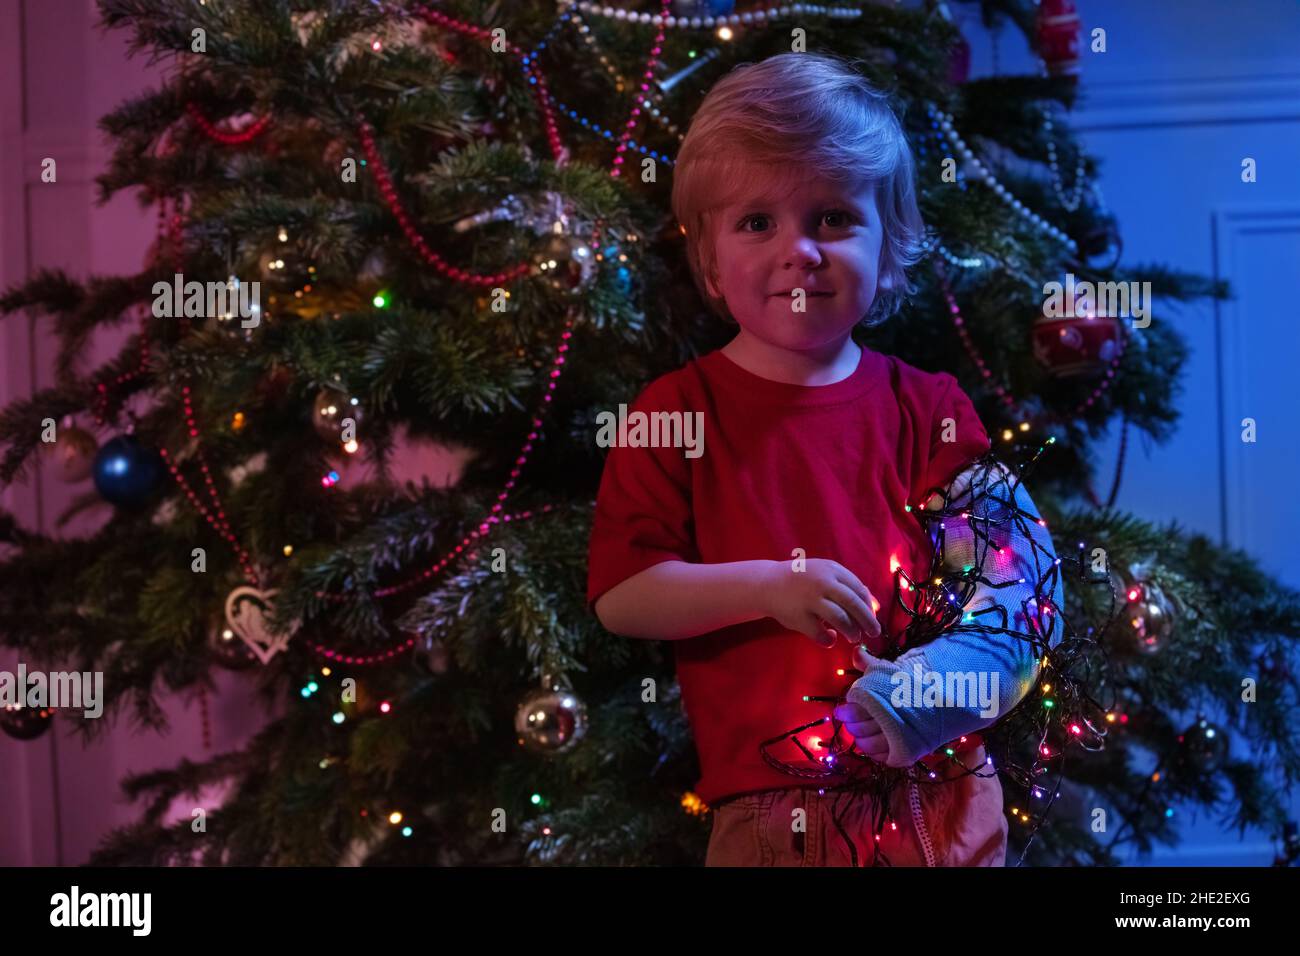 Child's broken hand in a cast and Christmas lights Stock Photo